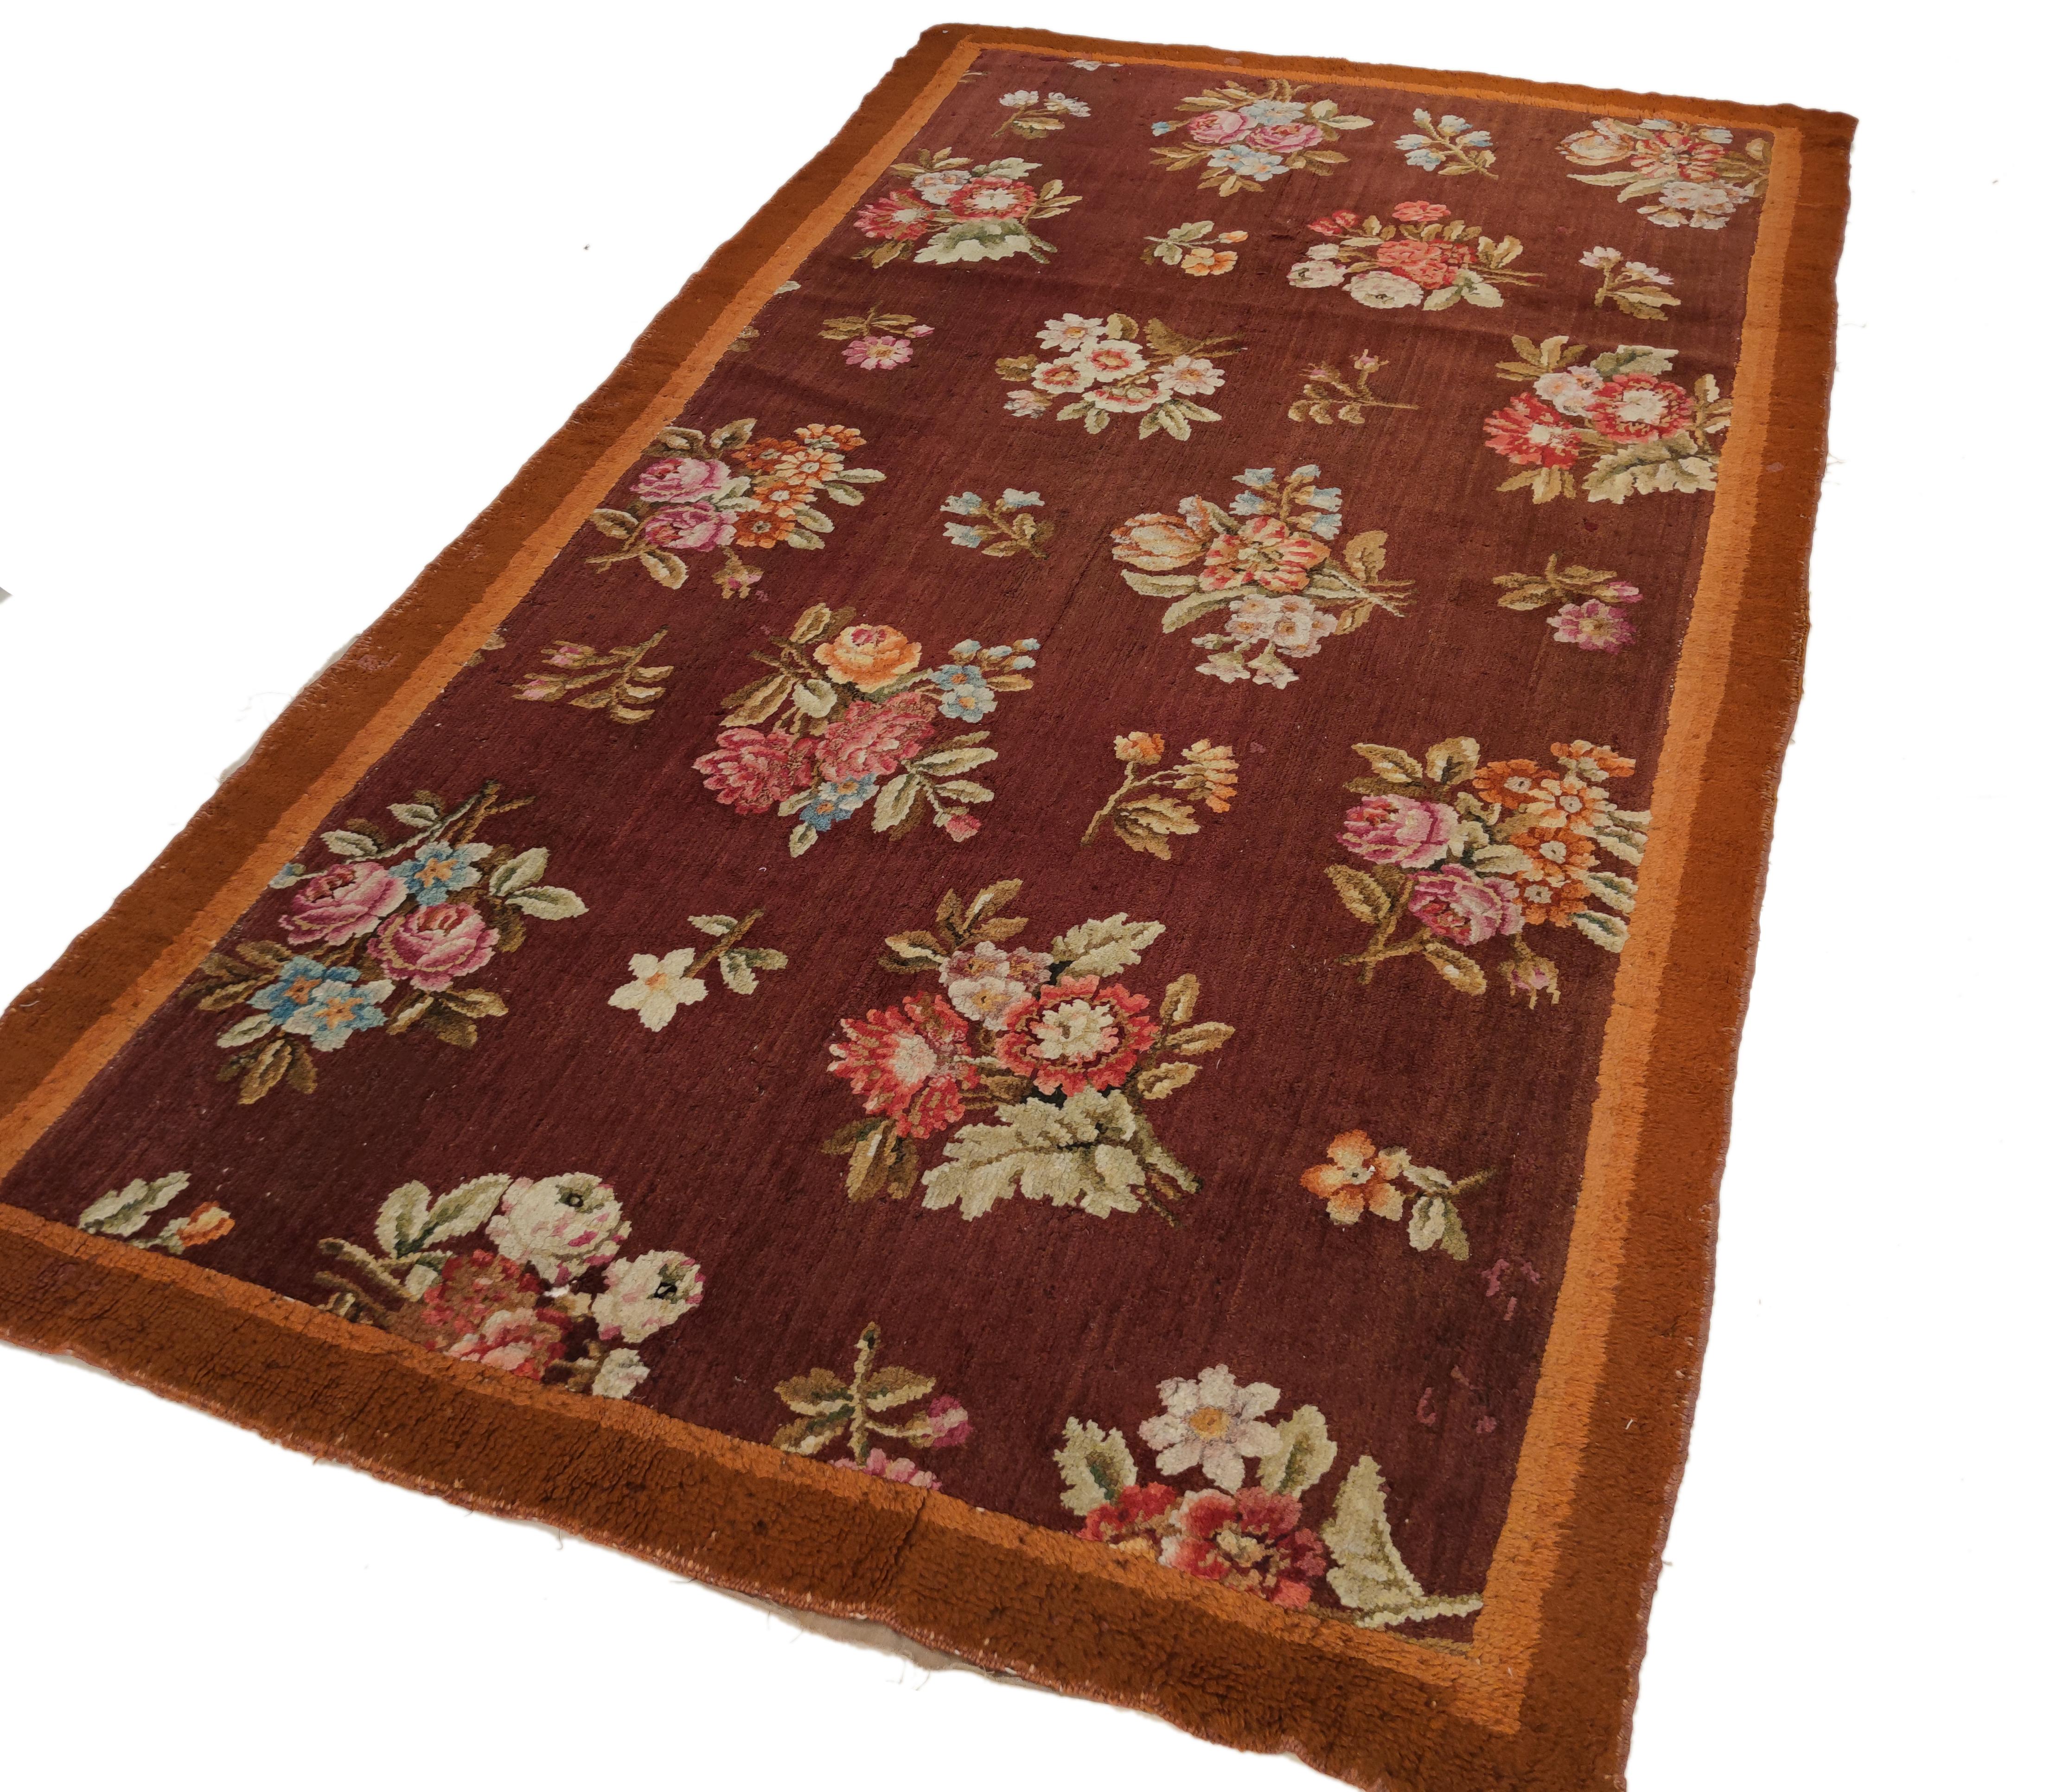 The prestigious Savonnerie rugs woven at Aubusson have always been synonymous of antique French textile art. These find their best expression in the age of Napoleon, the First Empire, where he organized a system of supervision and unification of the